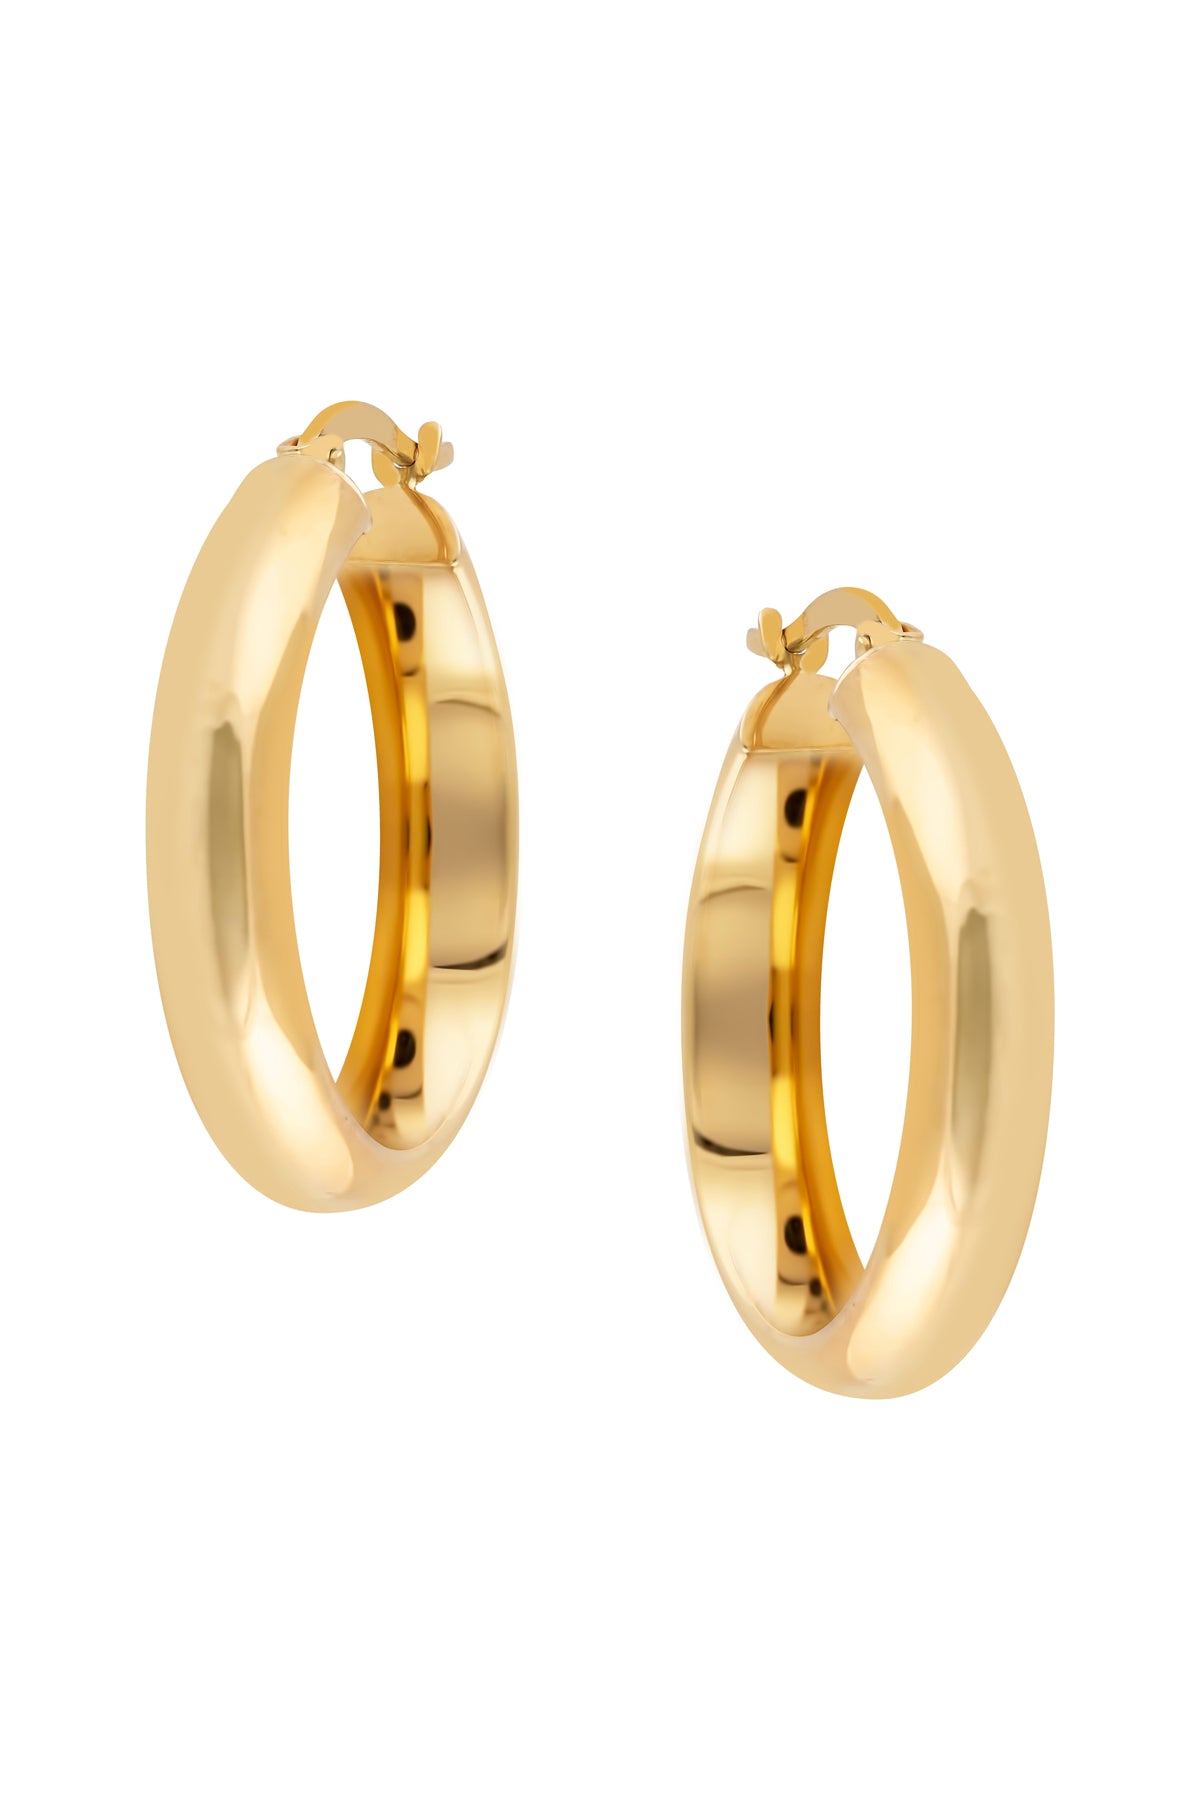 Domed Polished Yellow Gold Hoop Earrings from LeGassick Jewellery.